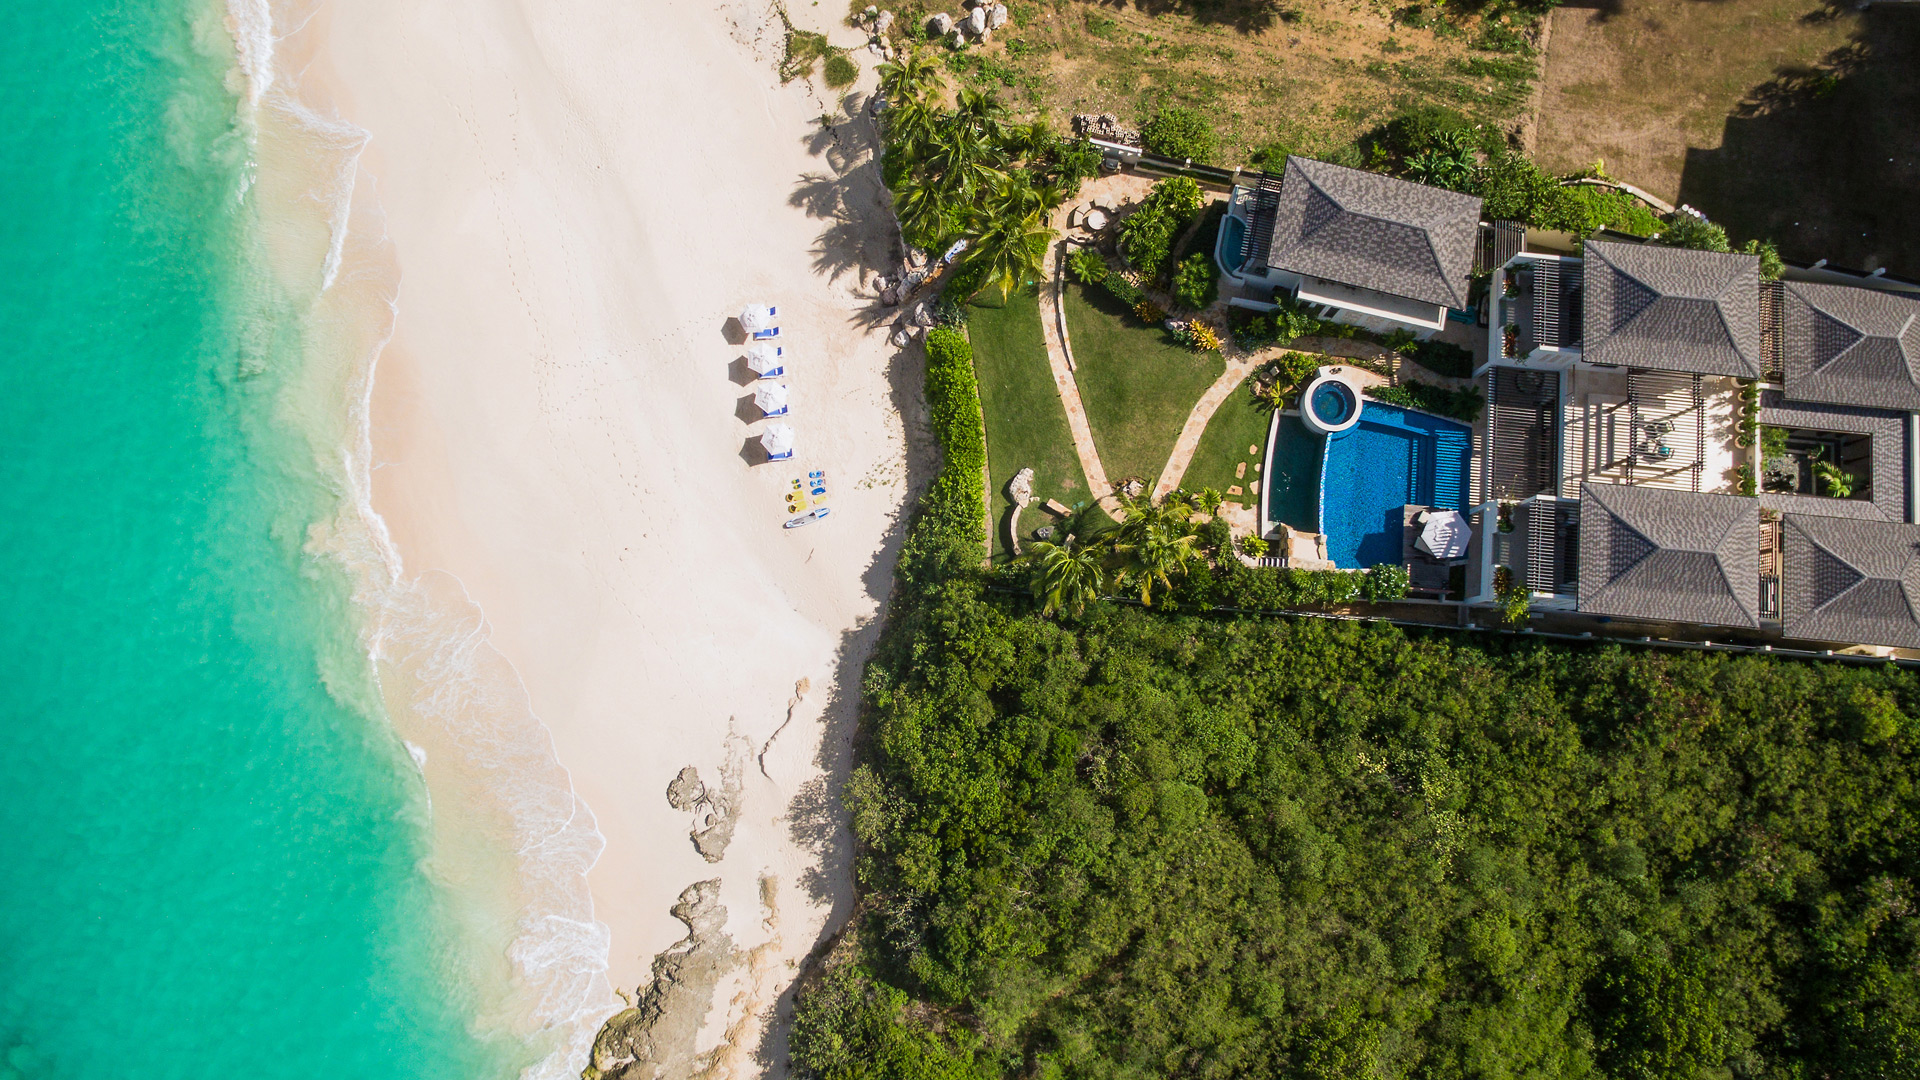 A birds eye view of this luxury beachfront property in Anguilla